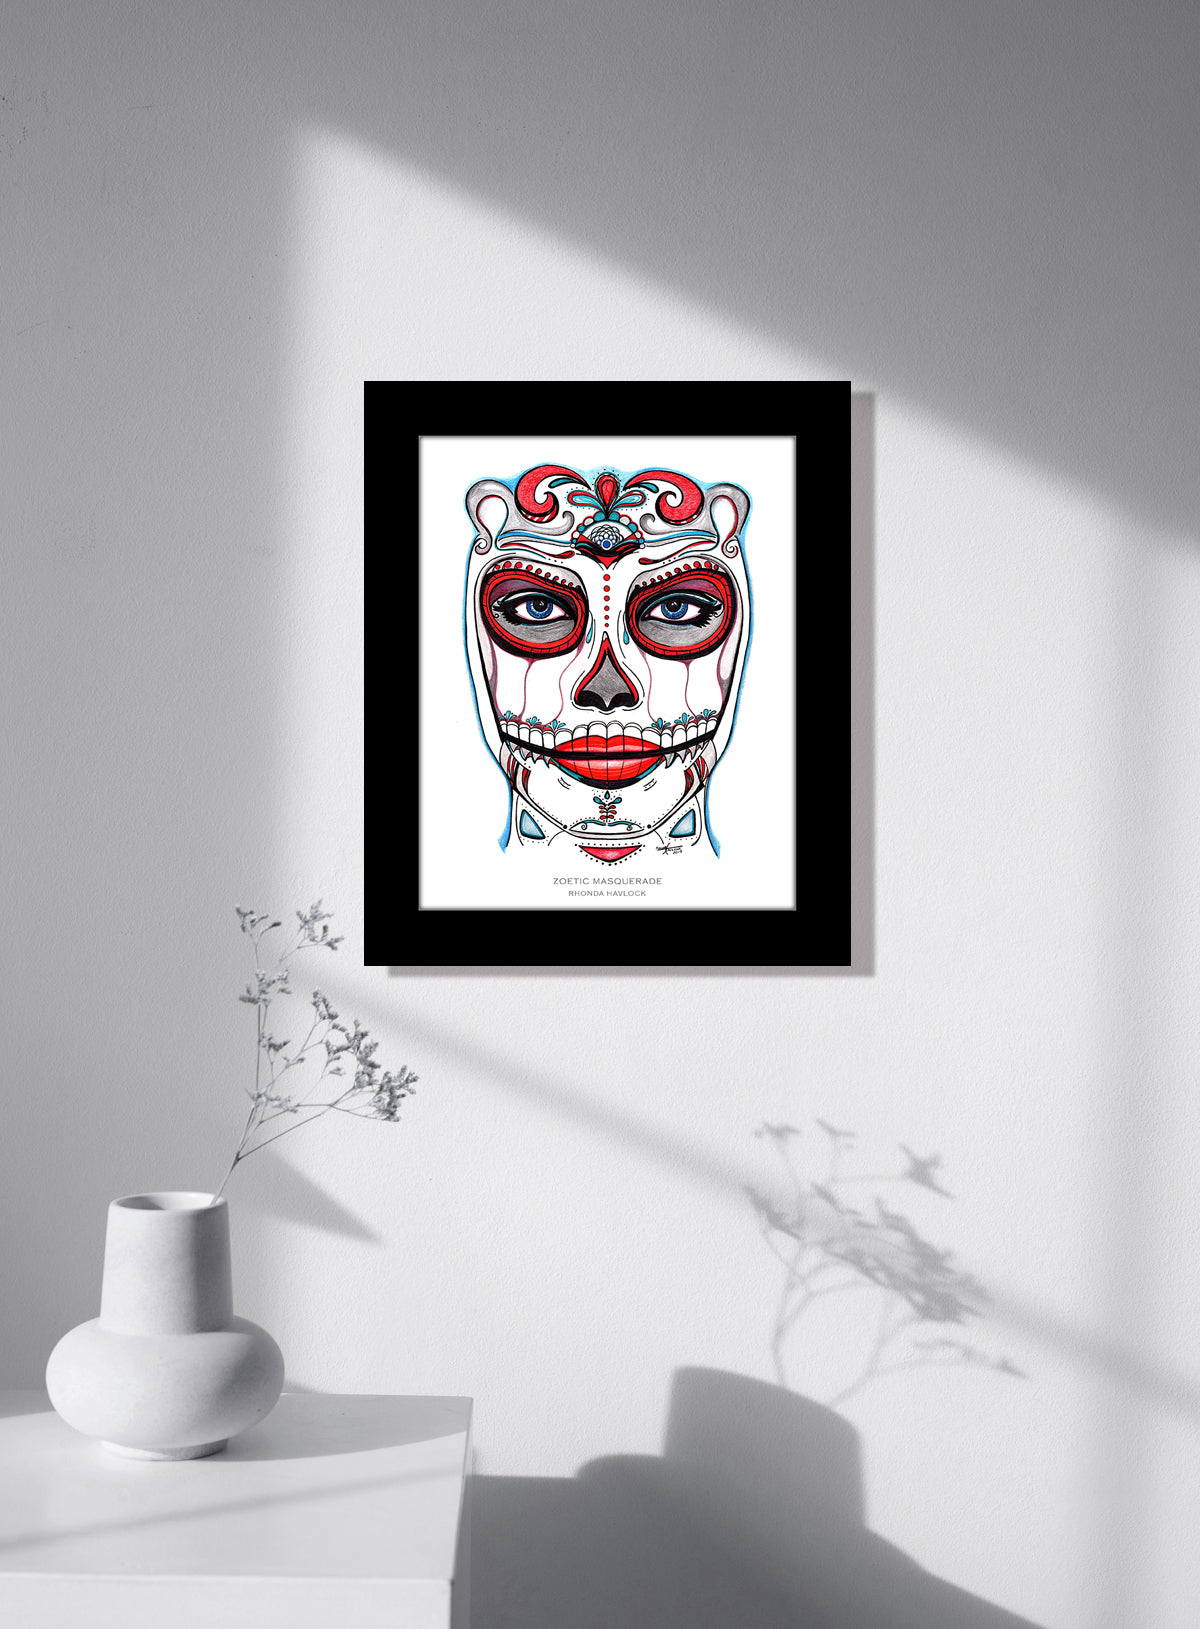 ZOETIC MASQUERADE ~ Abstract Geometry - 8x10 Print in Collector's Sleeve